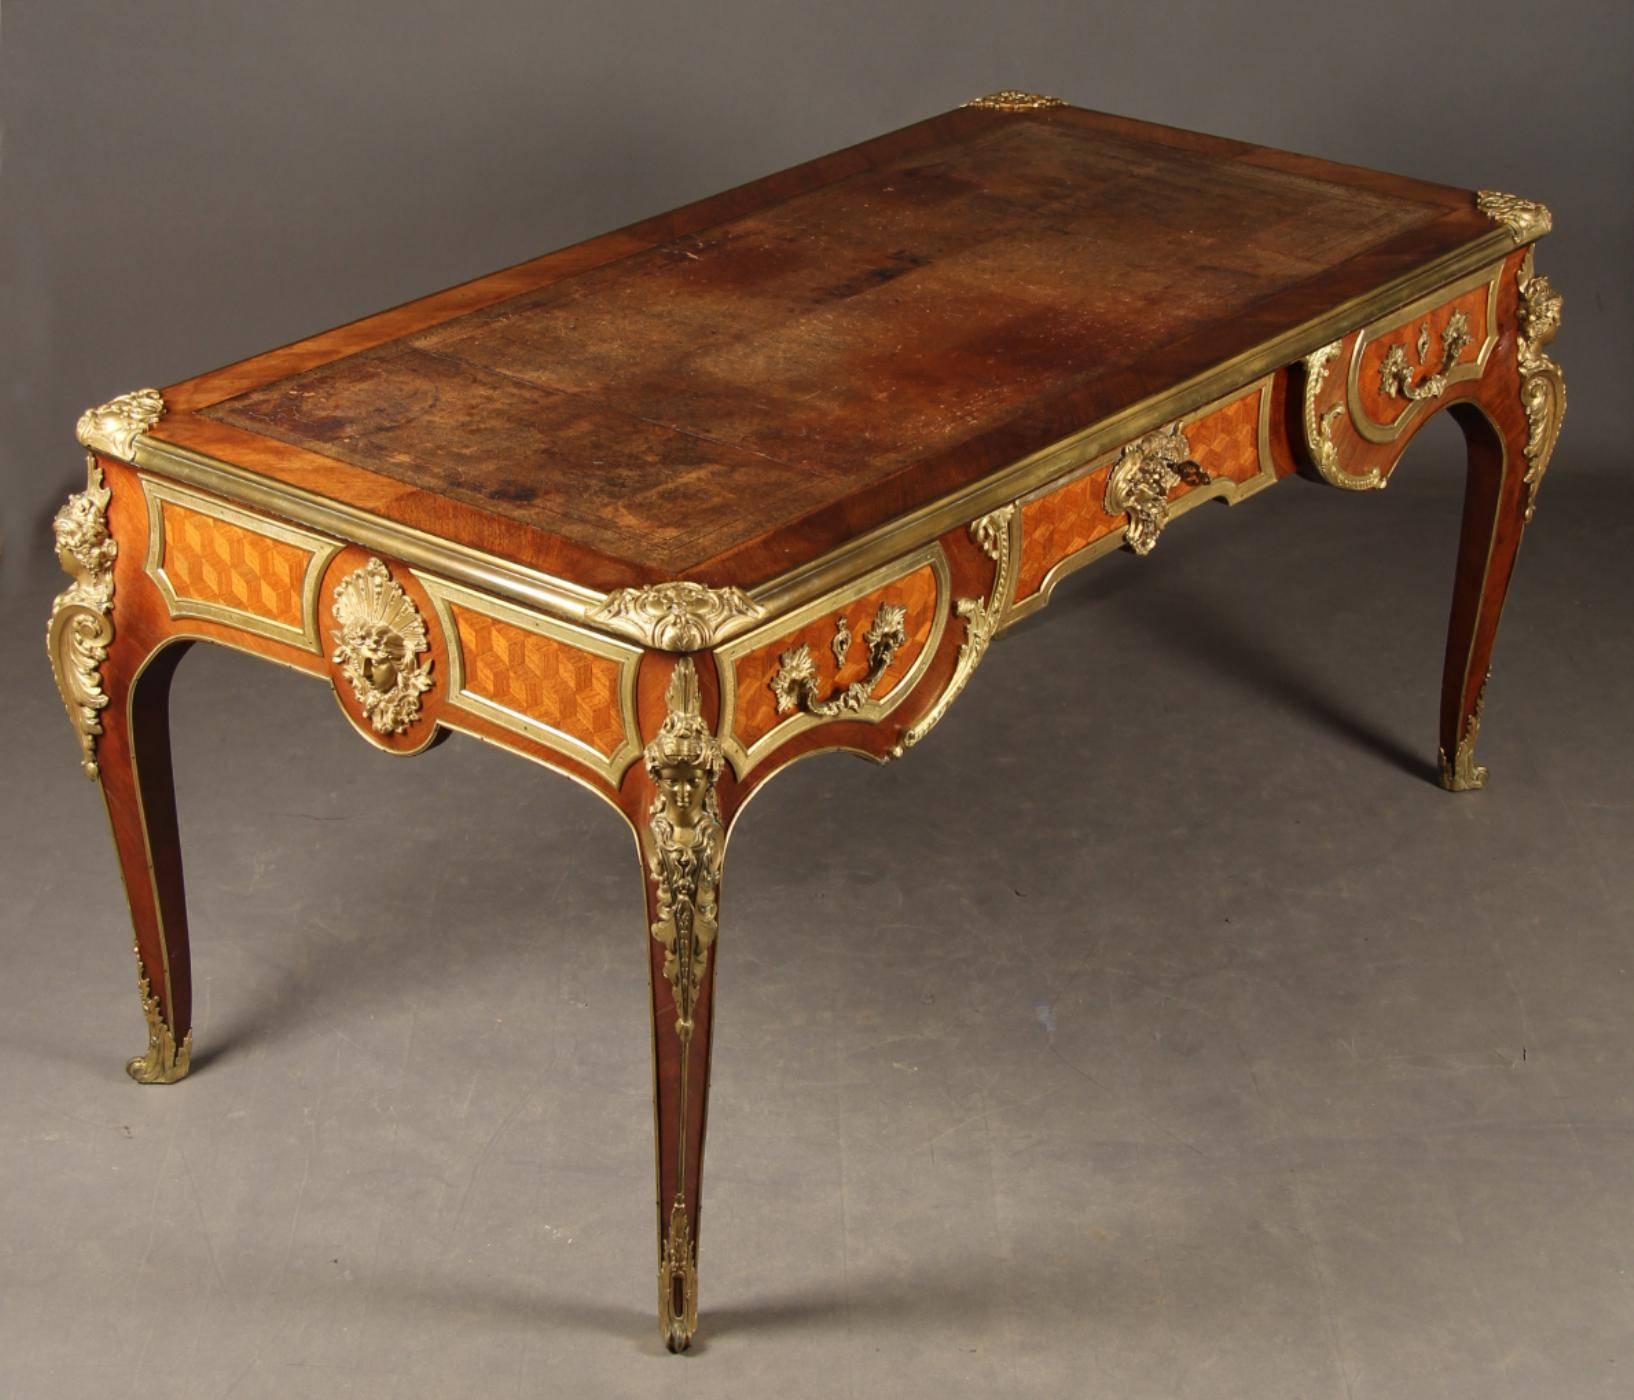 An important and beautiful France, 19th century, Louis XV style
Kingwood and ormolu Bureau plat, the desk is raised on elegant
cabriole legs richly chased ormolu mounts. Gilt tooled leather
writing surface.